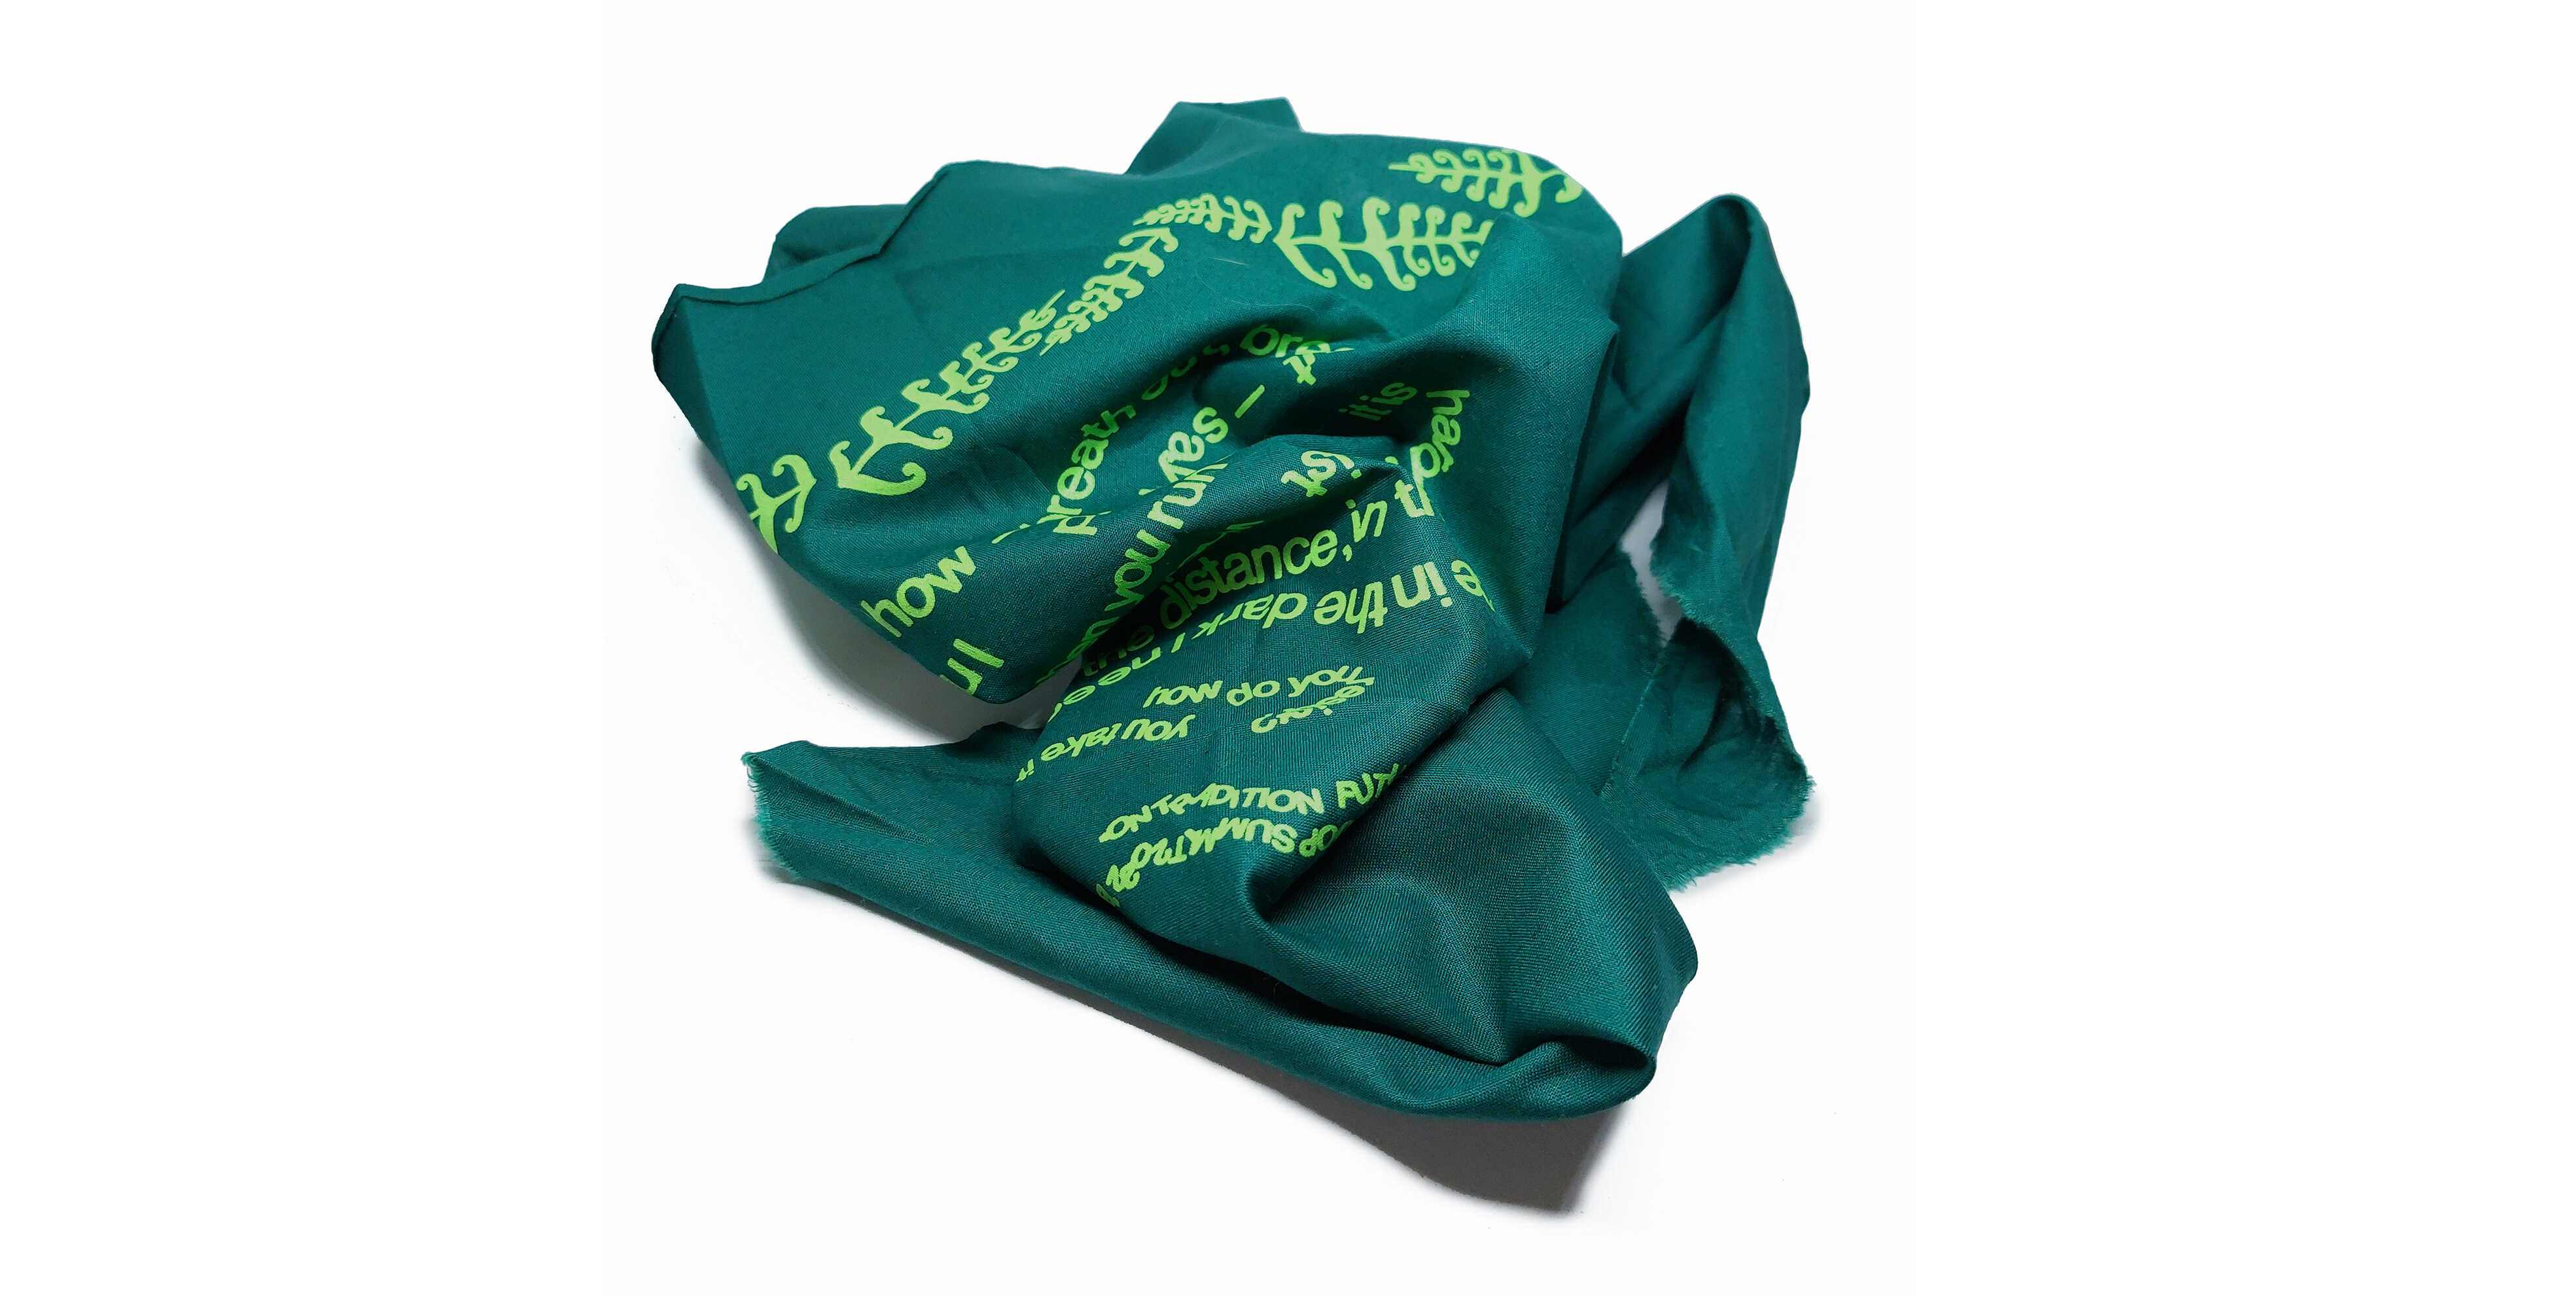 Green triangular bandana (wrapped) designed by COOP study group On Tradition - Future Ancestors 2: Rurality and Law for 2021- 2022 ~ COOP SUMMIT ~ collaborative research presentations in Bergamo & Milan.